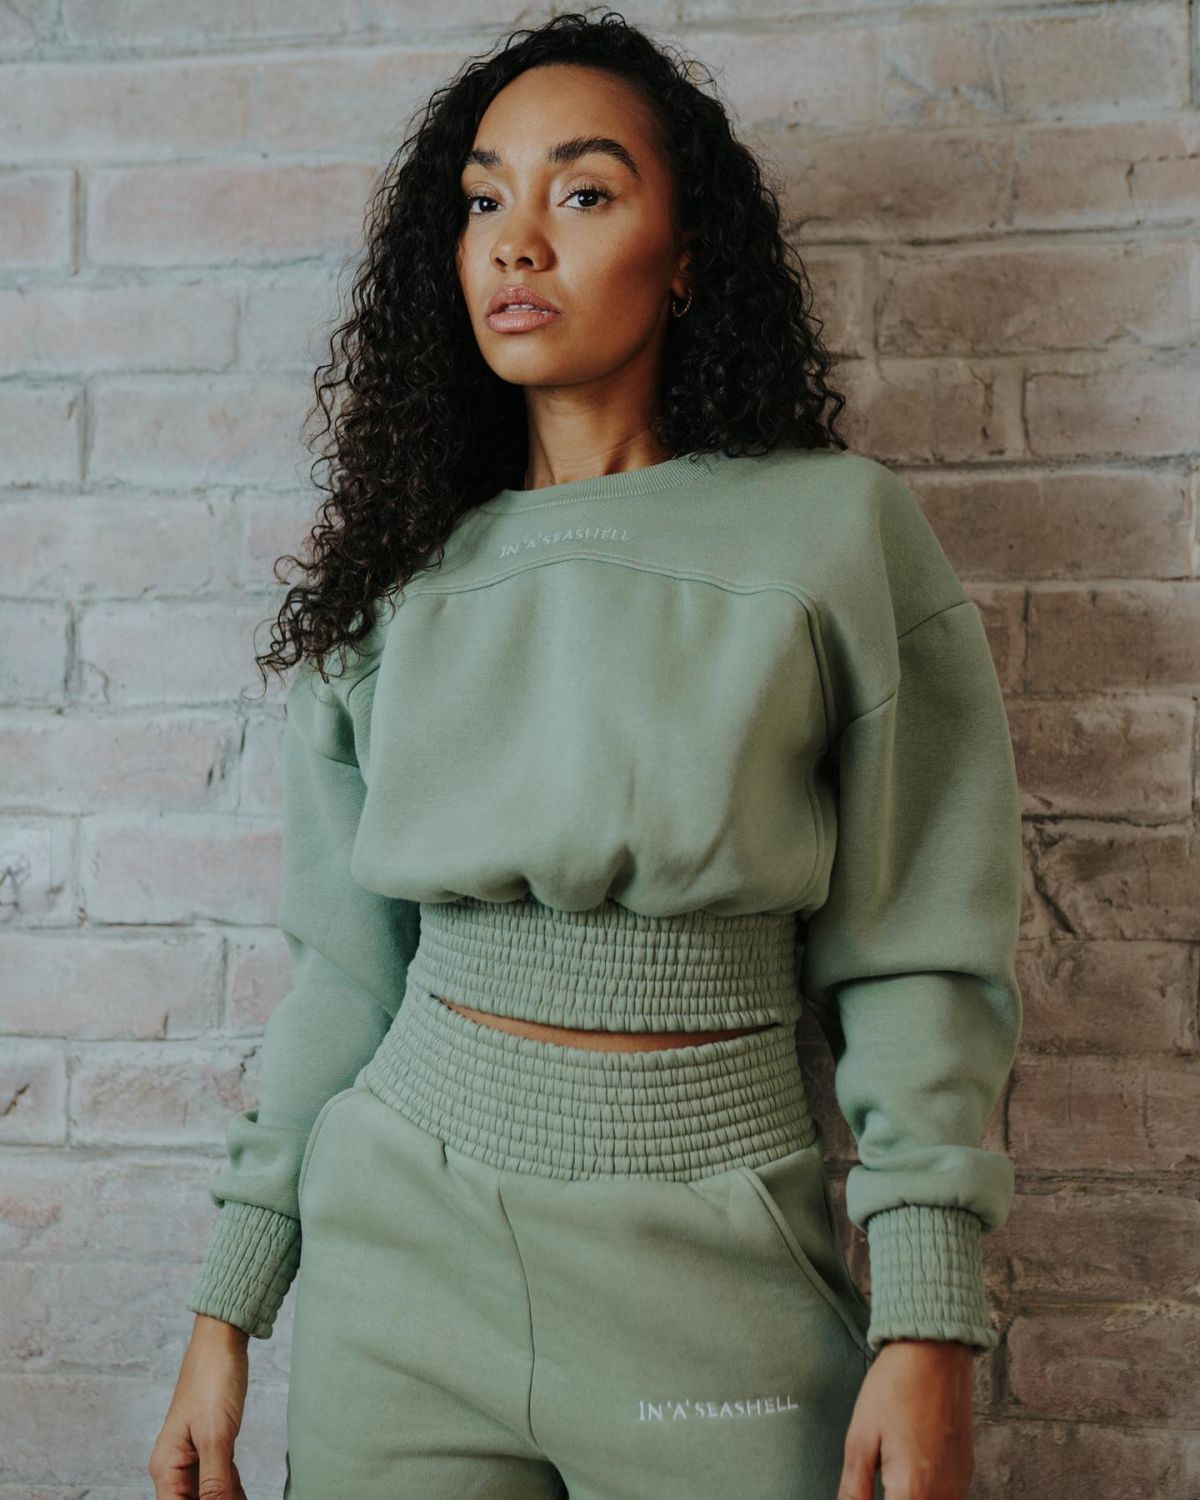 LEIGH-ANNE PINNOCK for Her In’a’seashell Loungewear Collection, 2022 ...